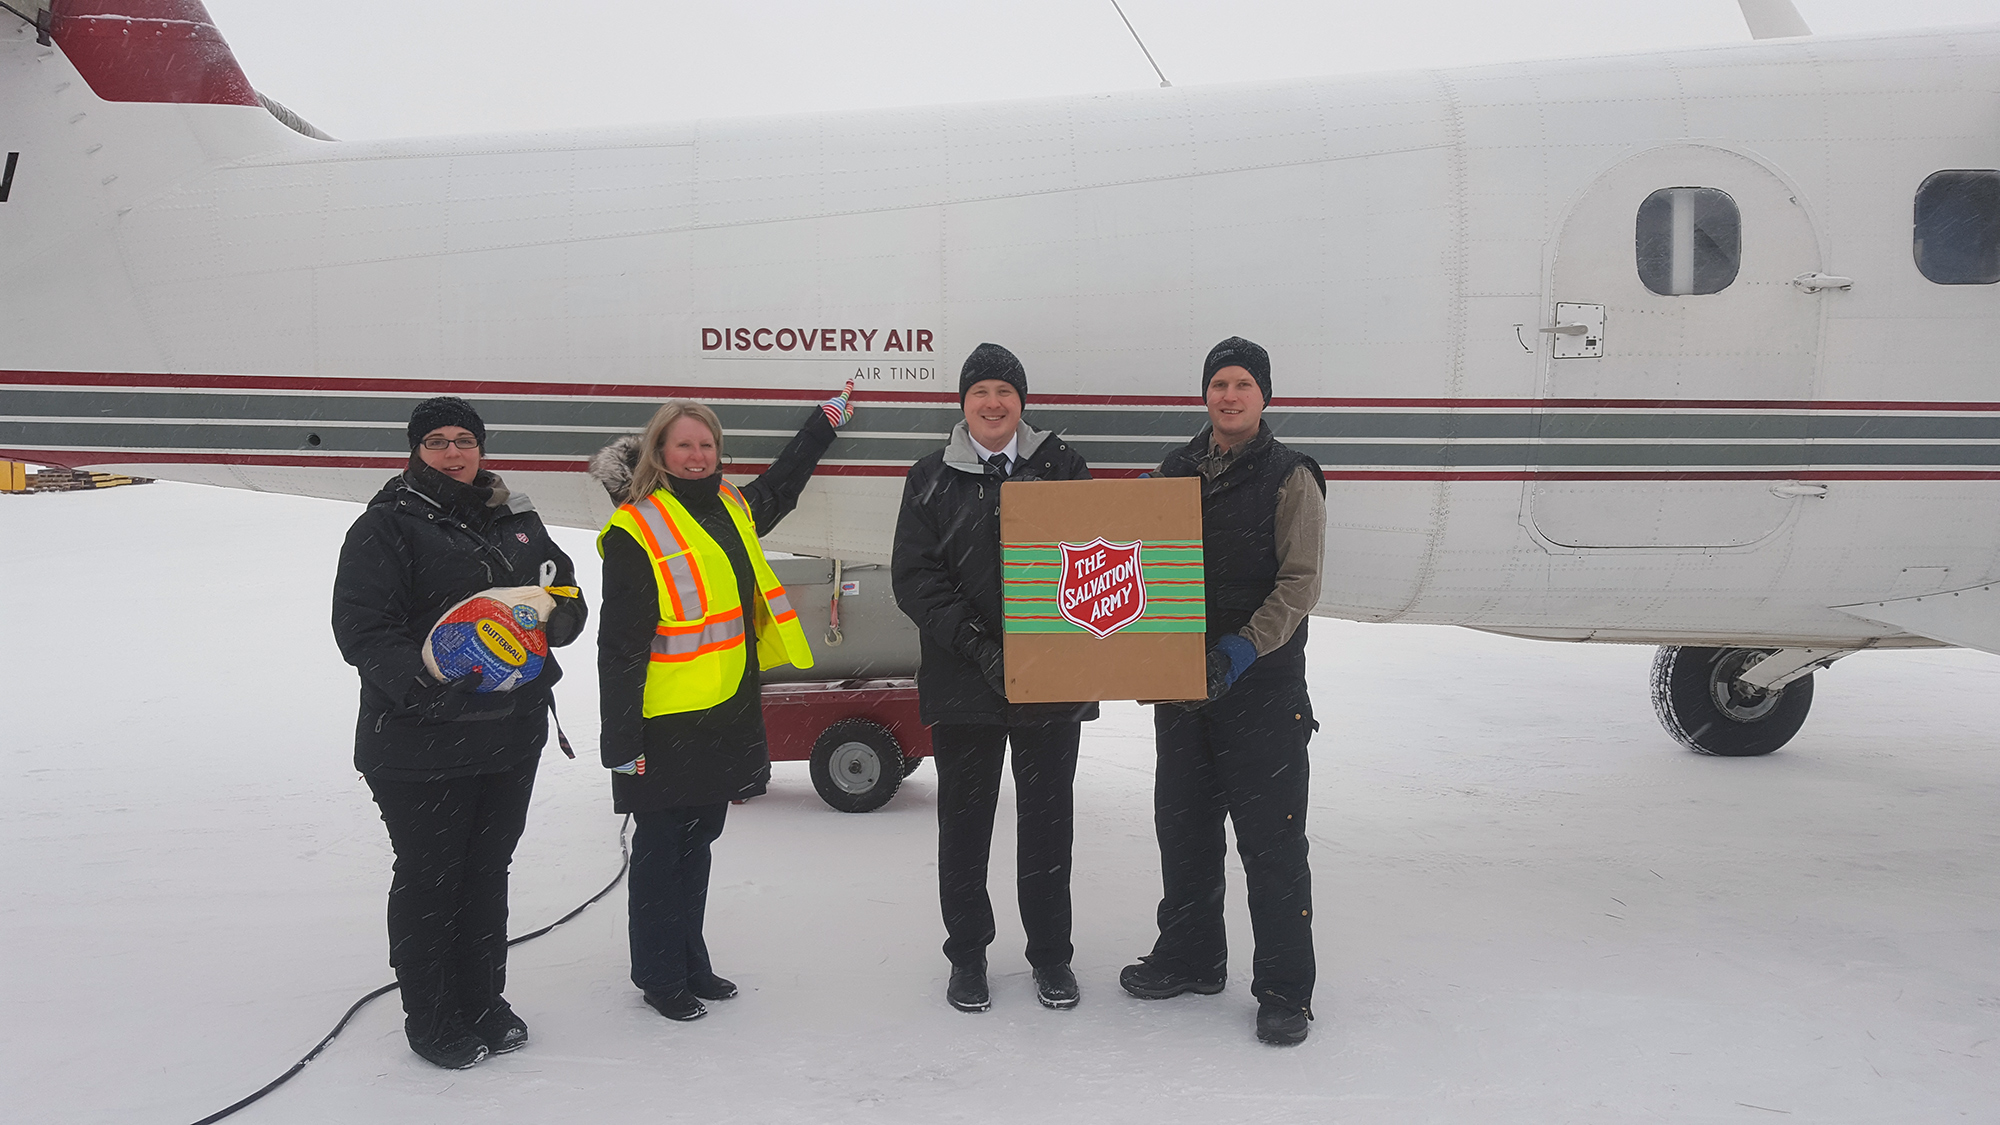 Christmas hampers are distributed by air in Canada's northern communities